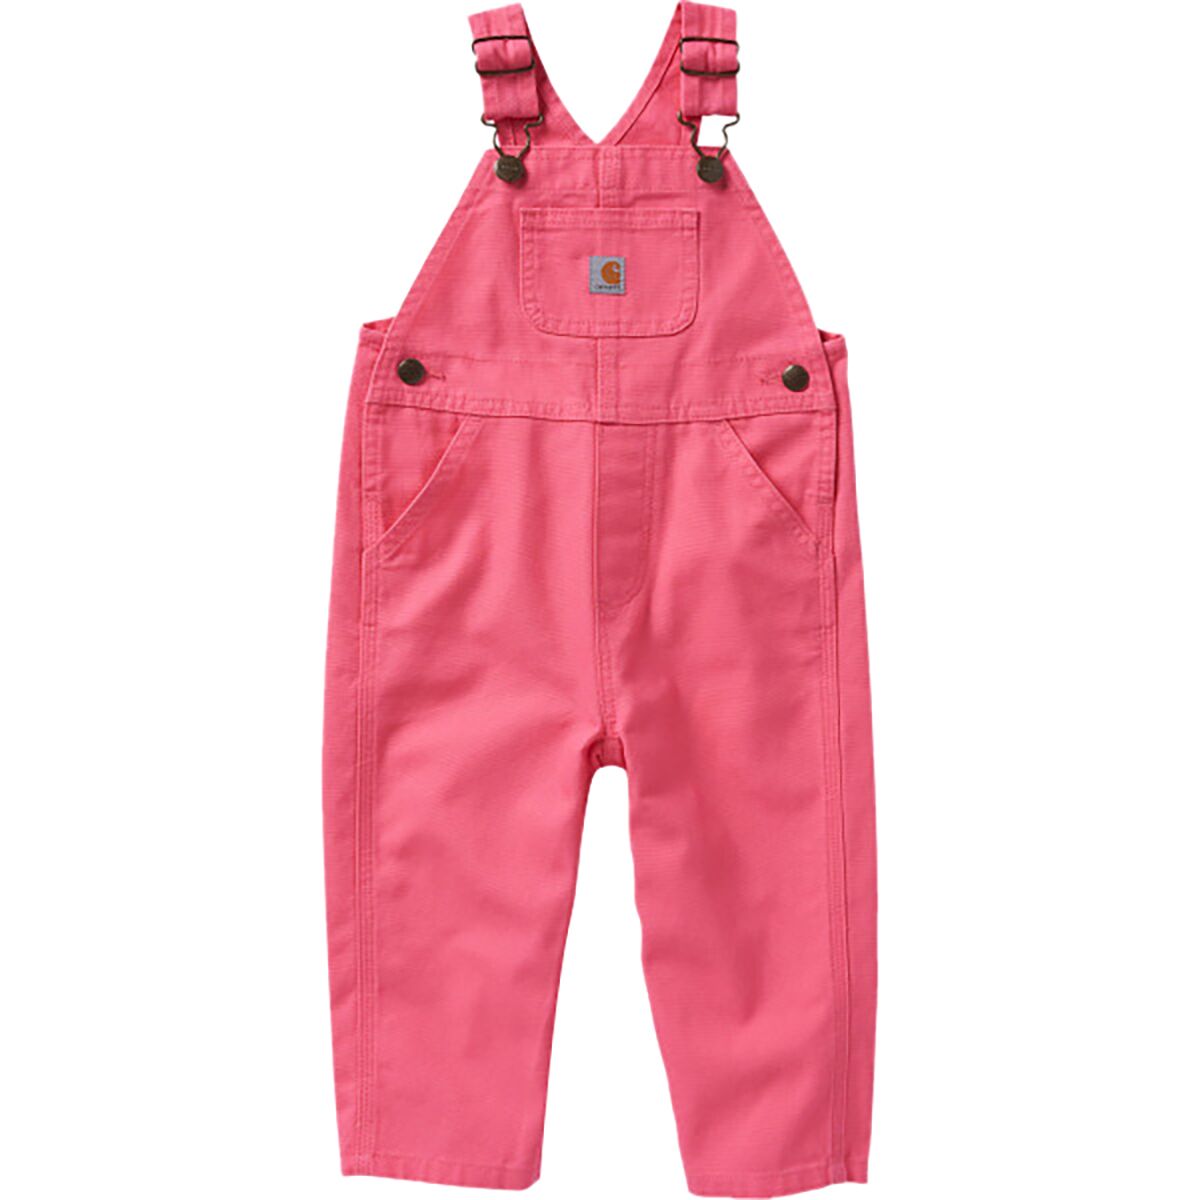 Carhartt Loose Fit Canvas Overall - Infant Girls'